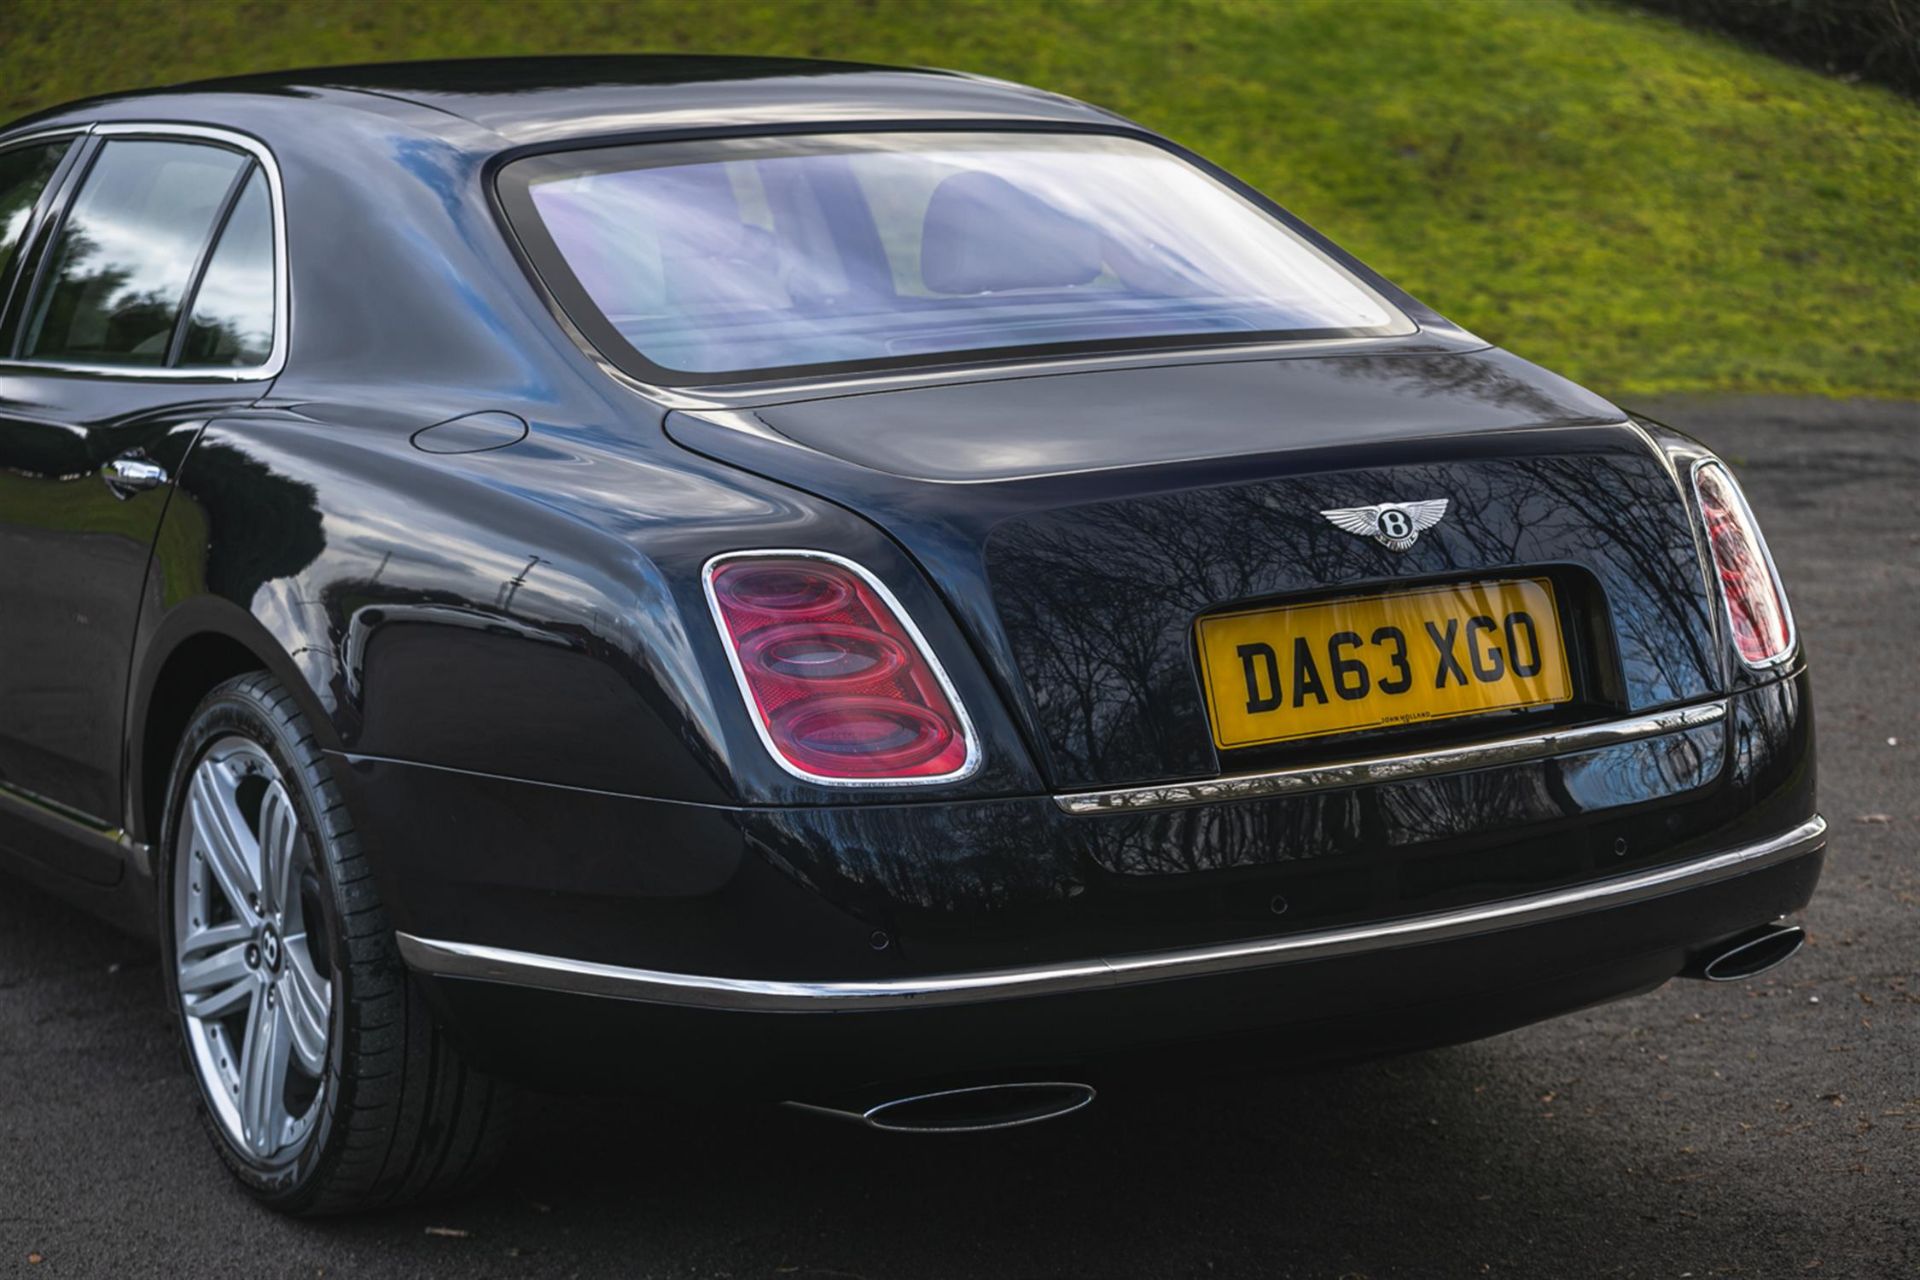 2013 Bentley Mulsanne - Former Bentley Special Ops with Royal Household Duties - Image 9 of 10